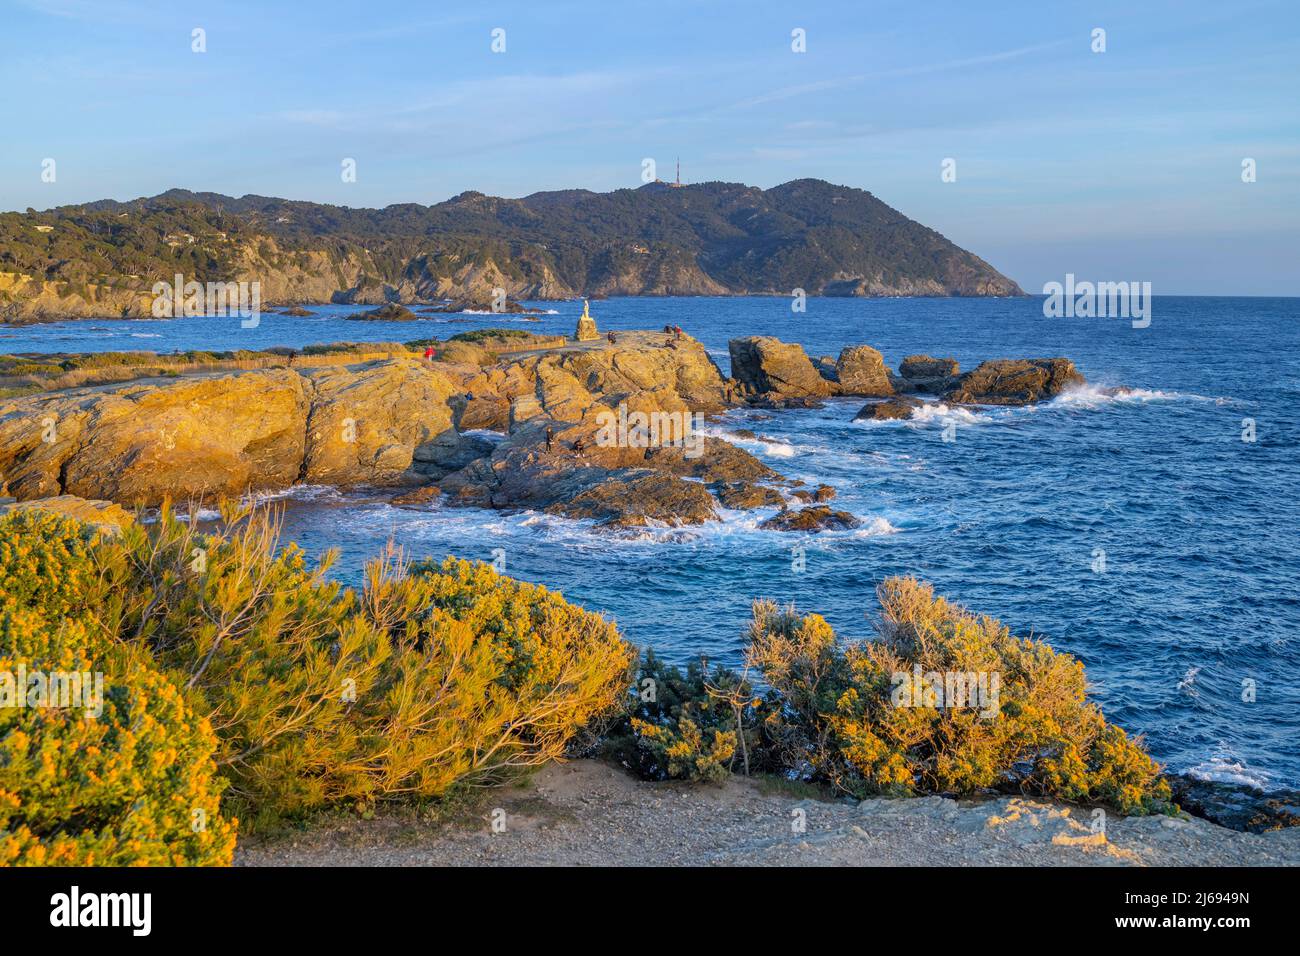 Grand Gaou Island, Six-Fours-les-Plages, Provence-Alpes-Cote d'Azur, Frankreich, Mittelmeer, Europa Stockfoto